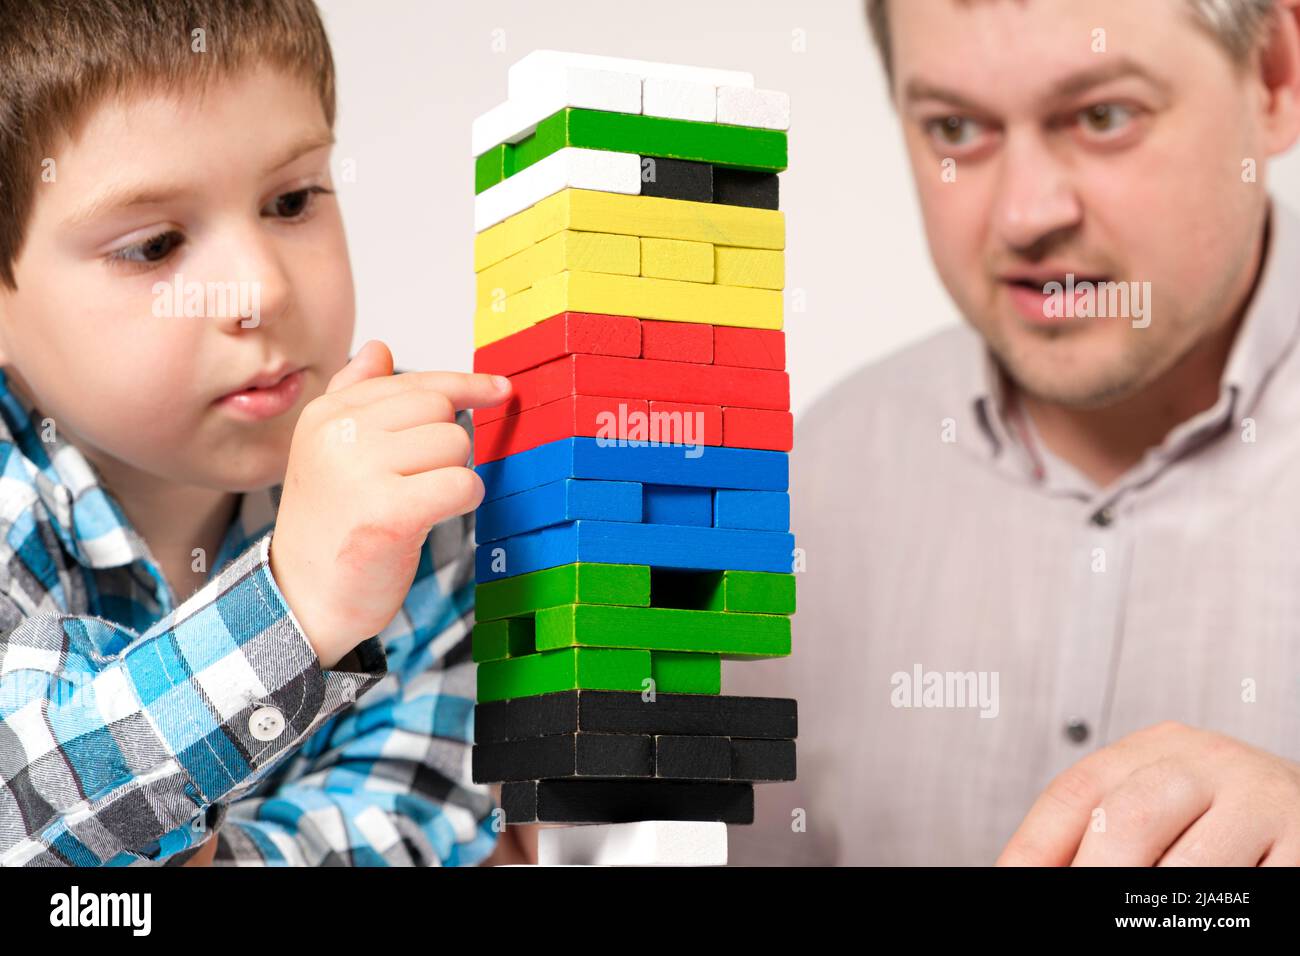 Dad and son play a board game together, pull parts out of the tower and try not to overwhelm the tower Stock Photo